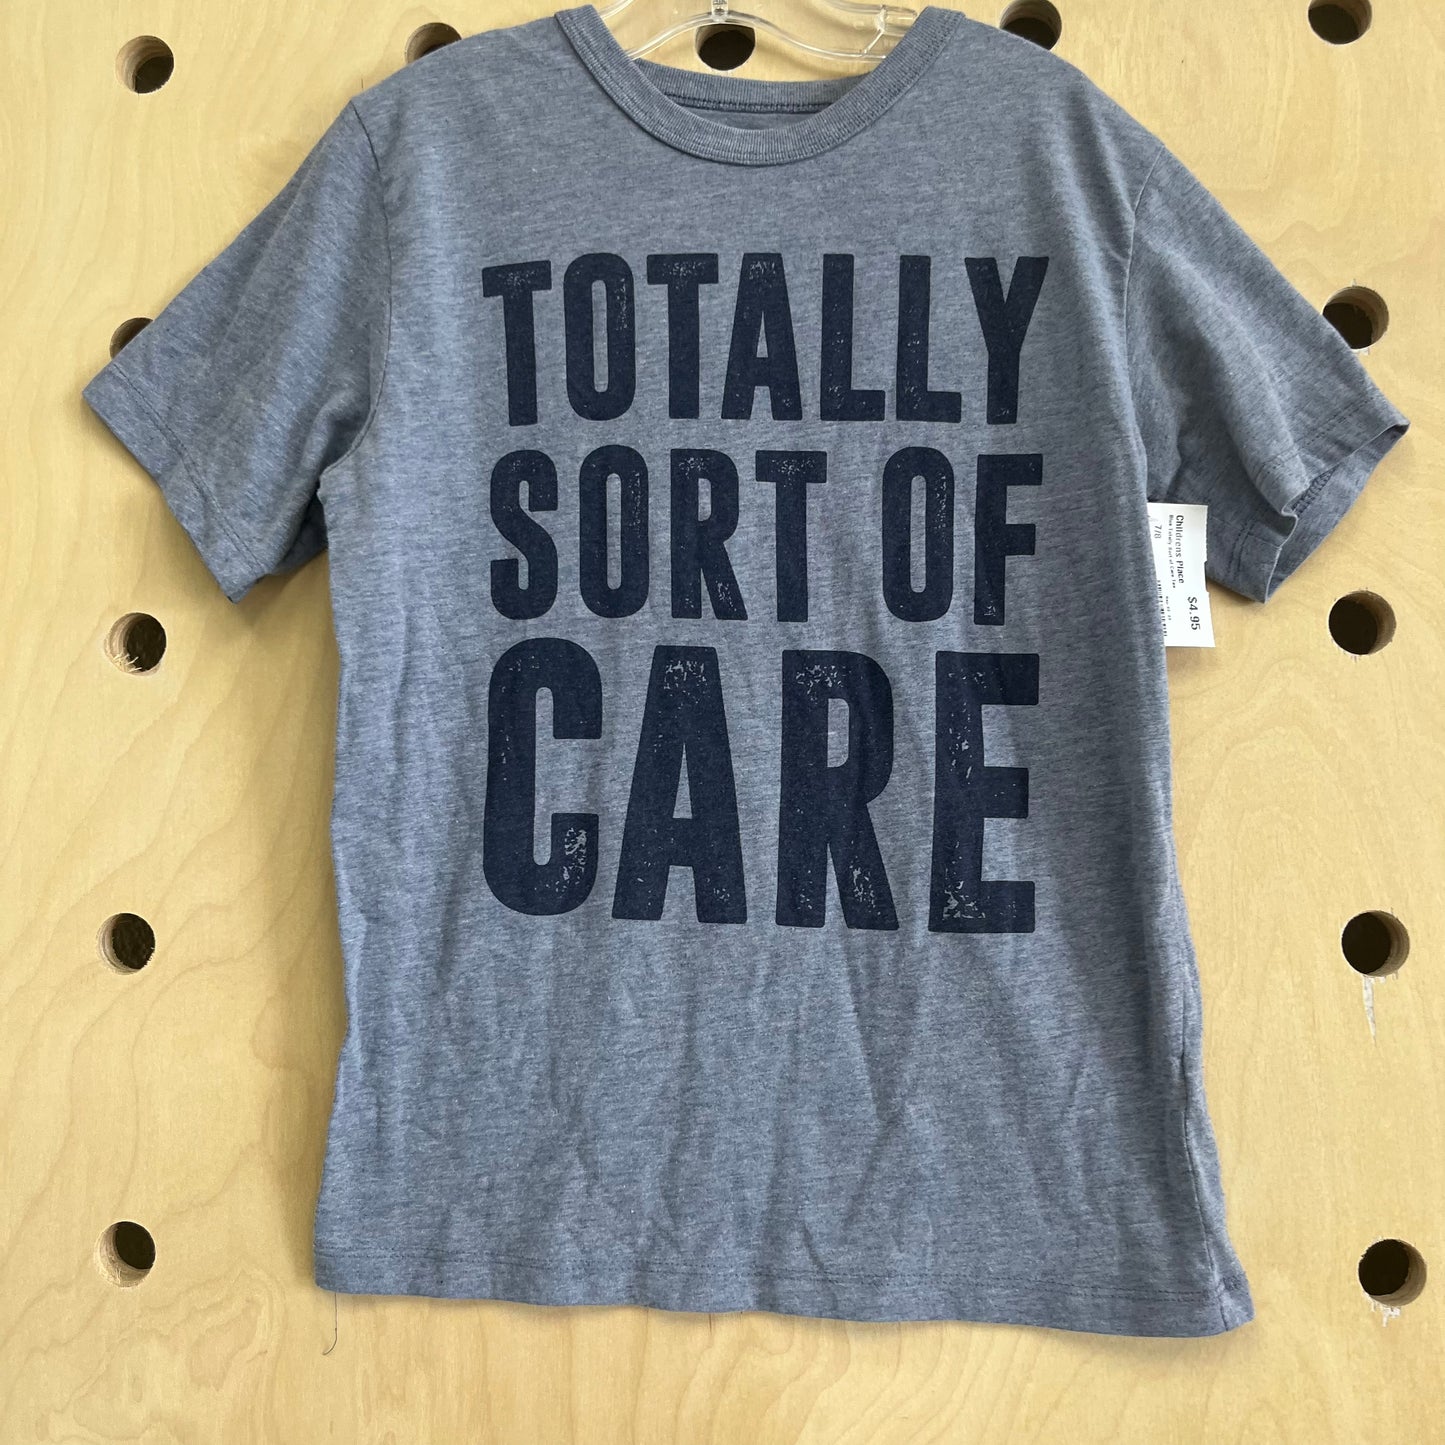 Blue Totally Sort of Care Tee